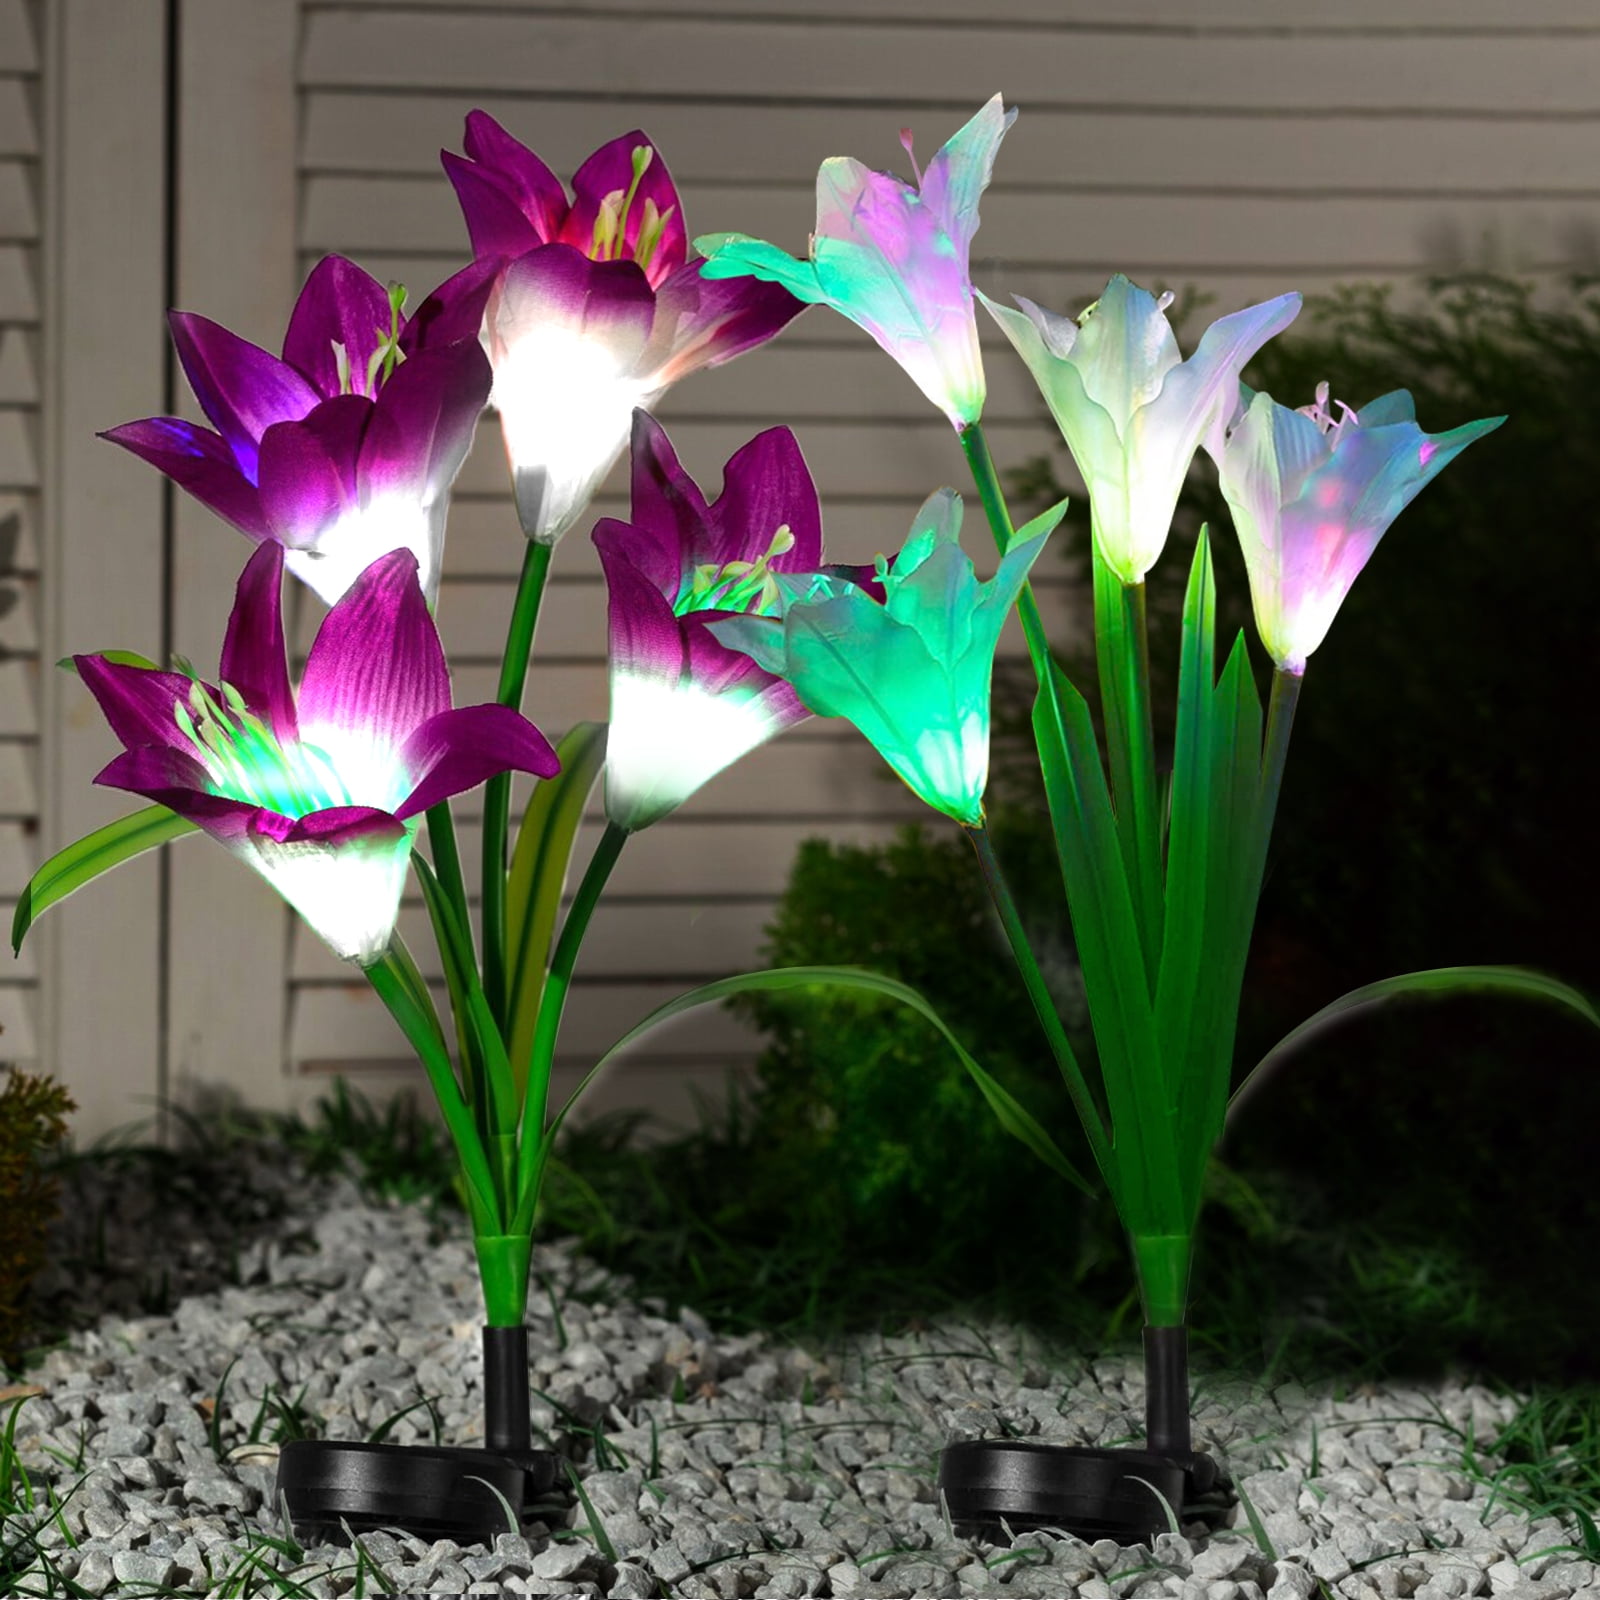 Powered Light Outdoor Garden 4 X Boxed Colour Changing Solar Stake Light 